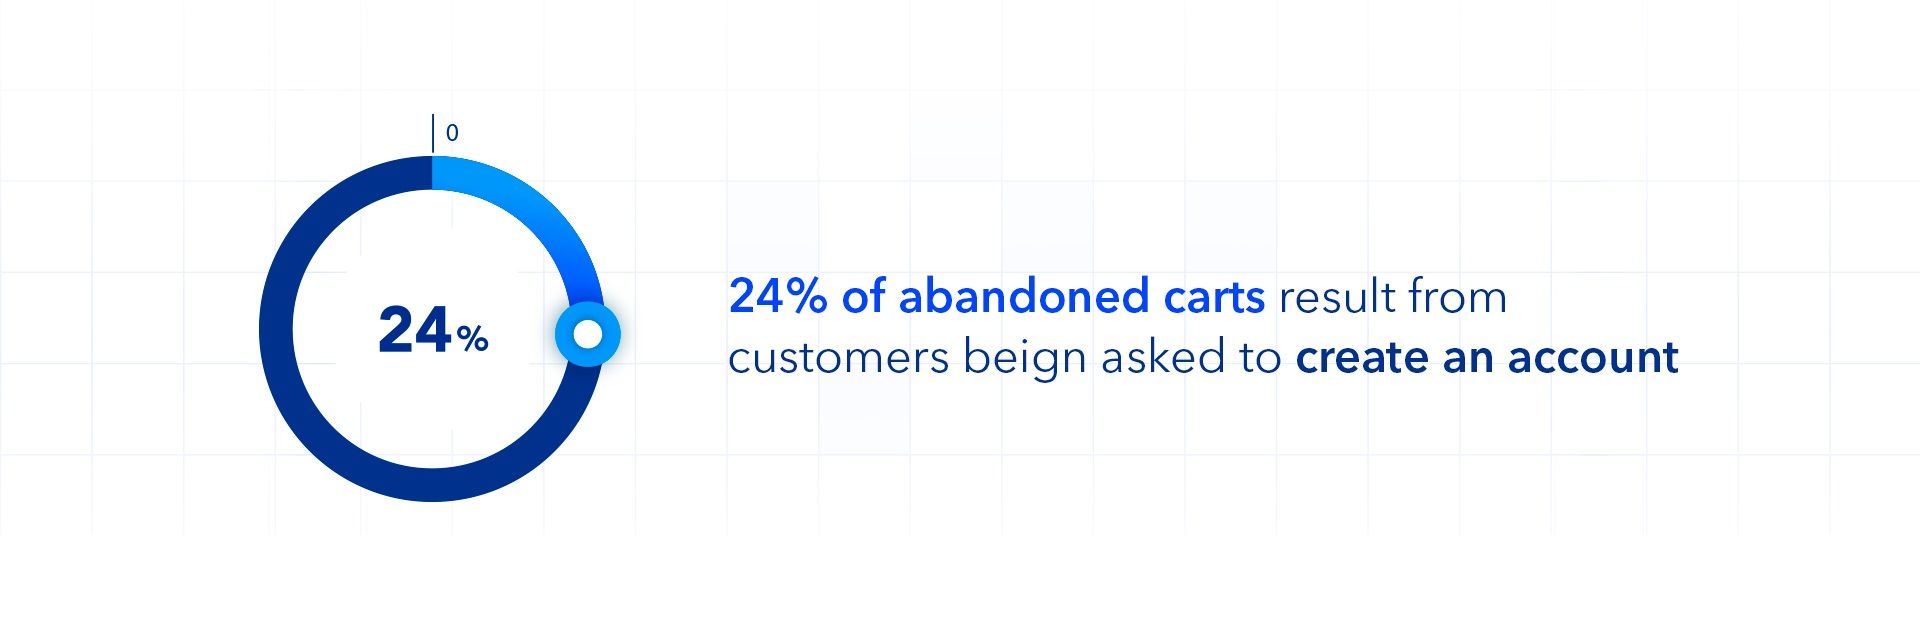 24% of abandoned carts results from customers being asked to create an account